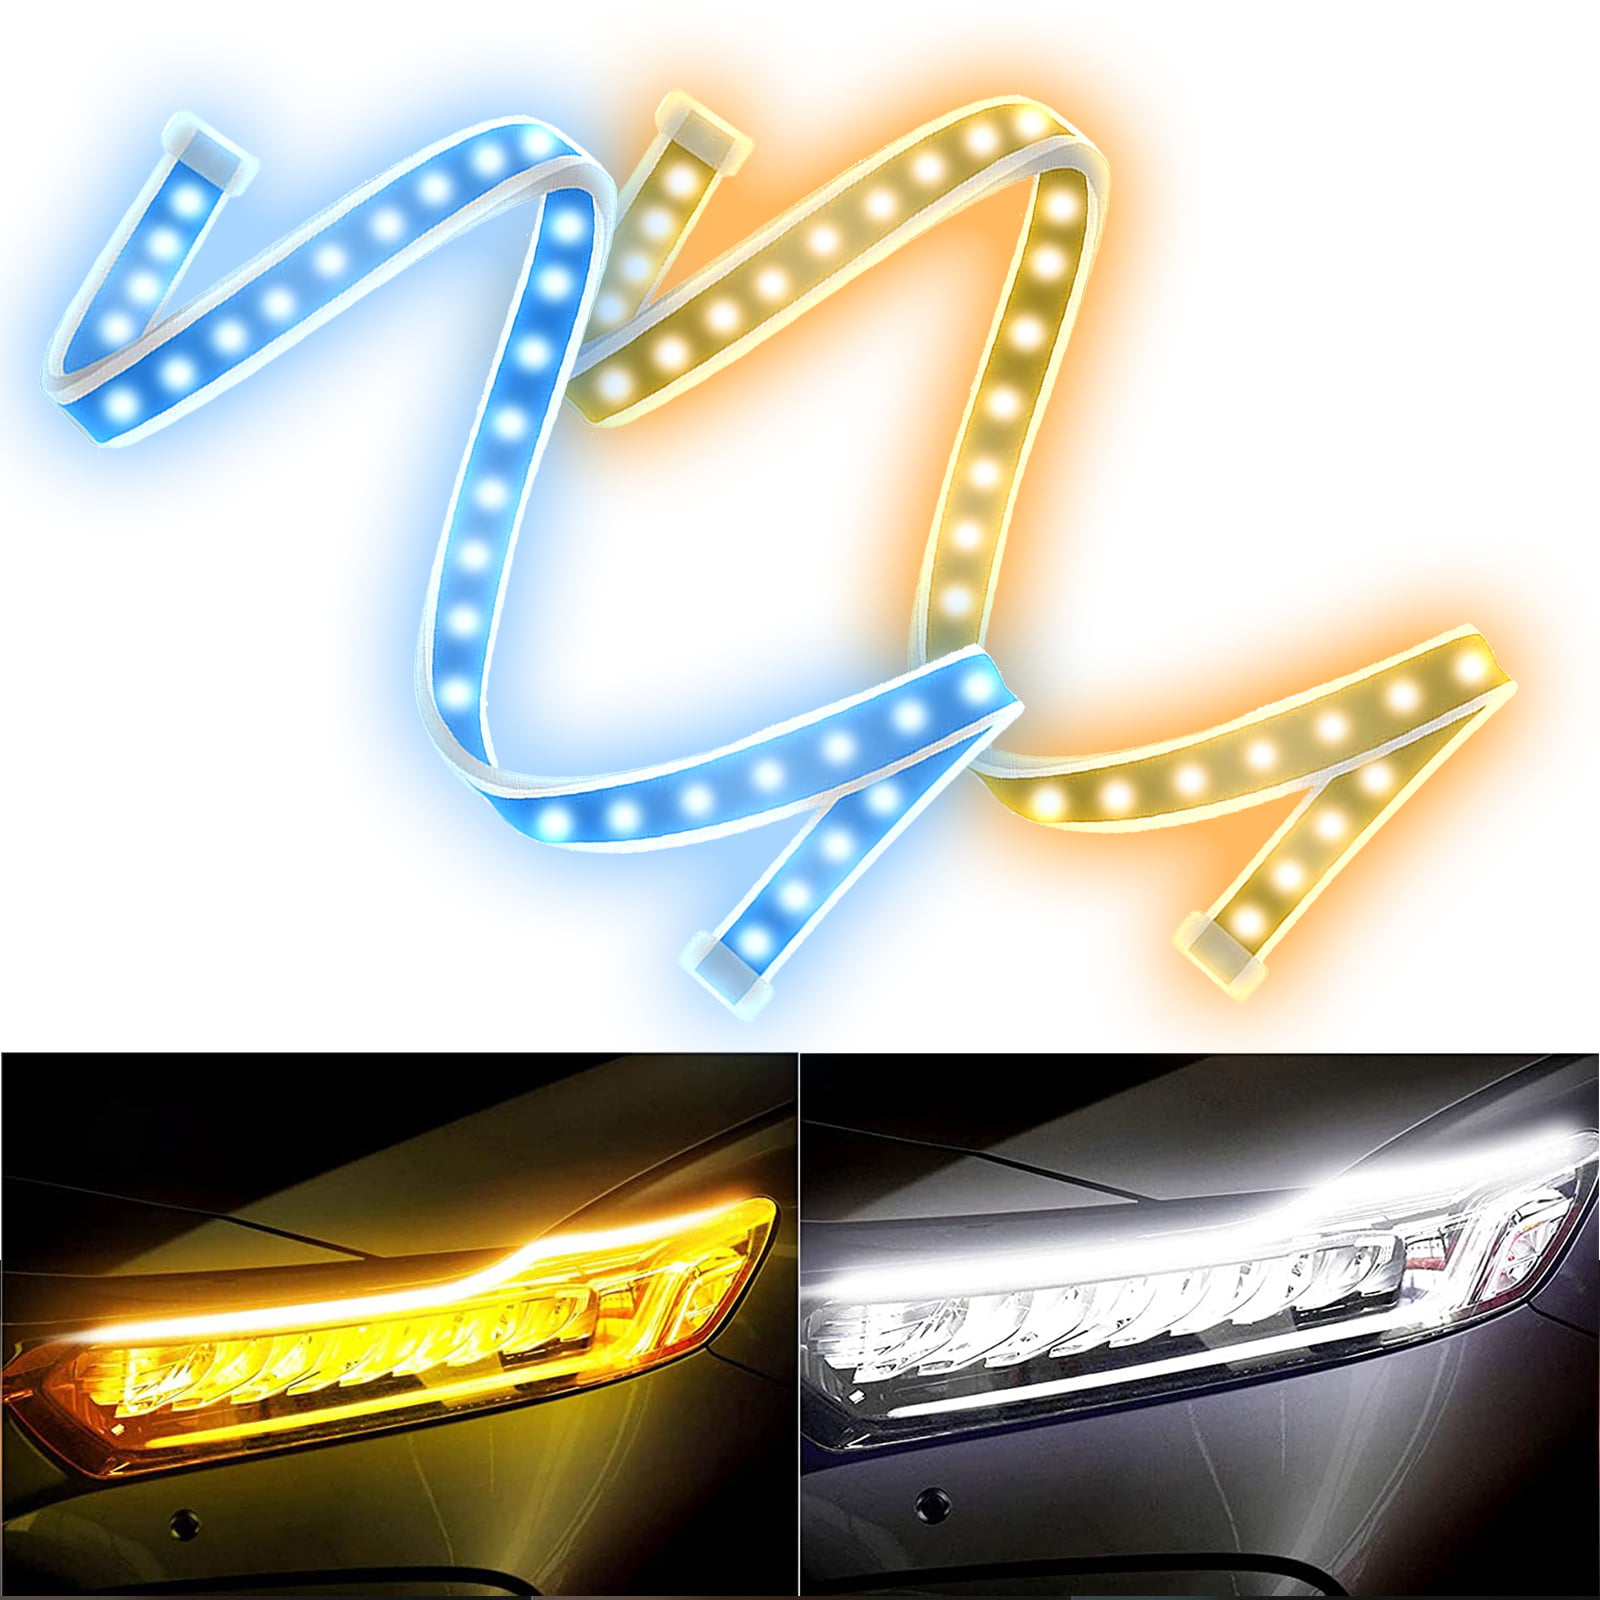 Car Flexible Daytime Running Lights Ice White-Amber Dual Color Sequence LED Strip Tube Switchback Headlight & Turn Signal Lights Tube Fits for Any 12V Cars FAYUE 2Pcs 24 Inches DRL LED Light Strip 